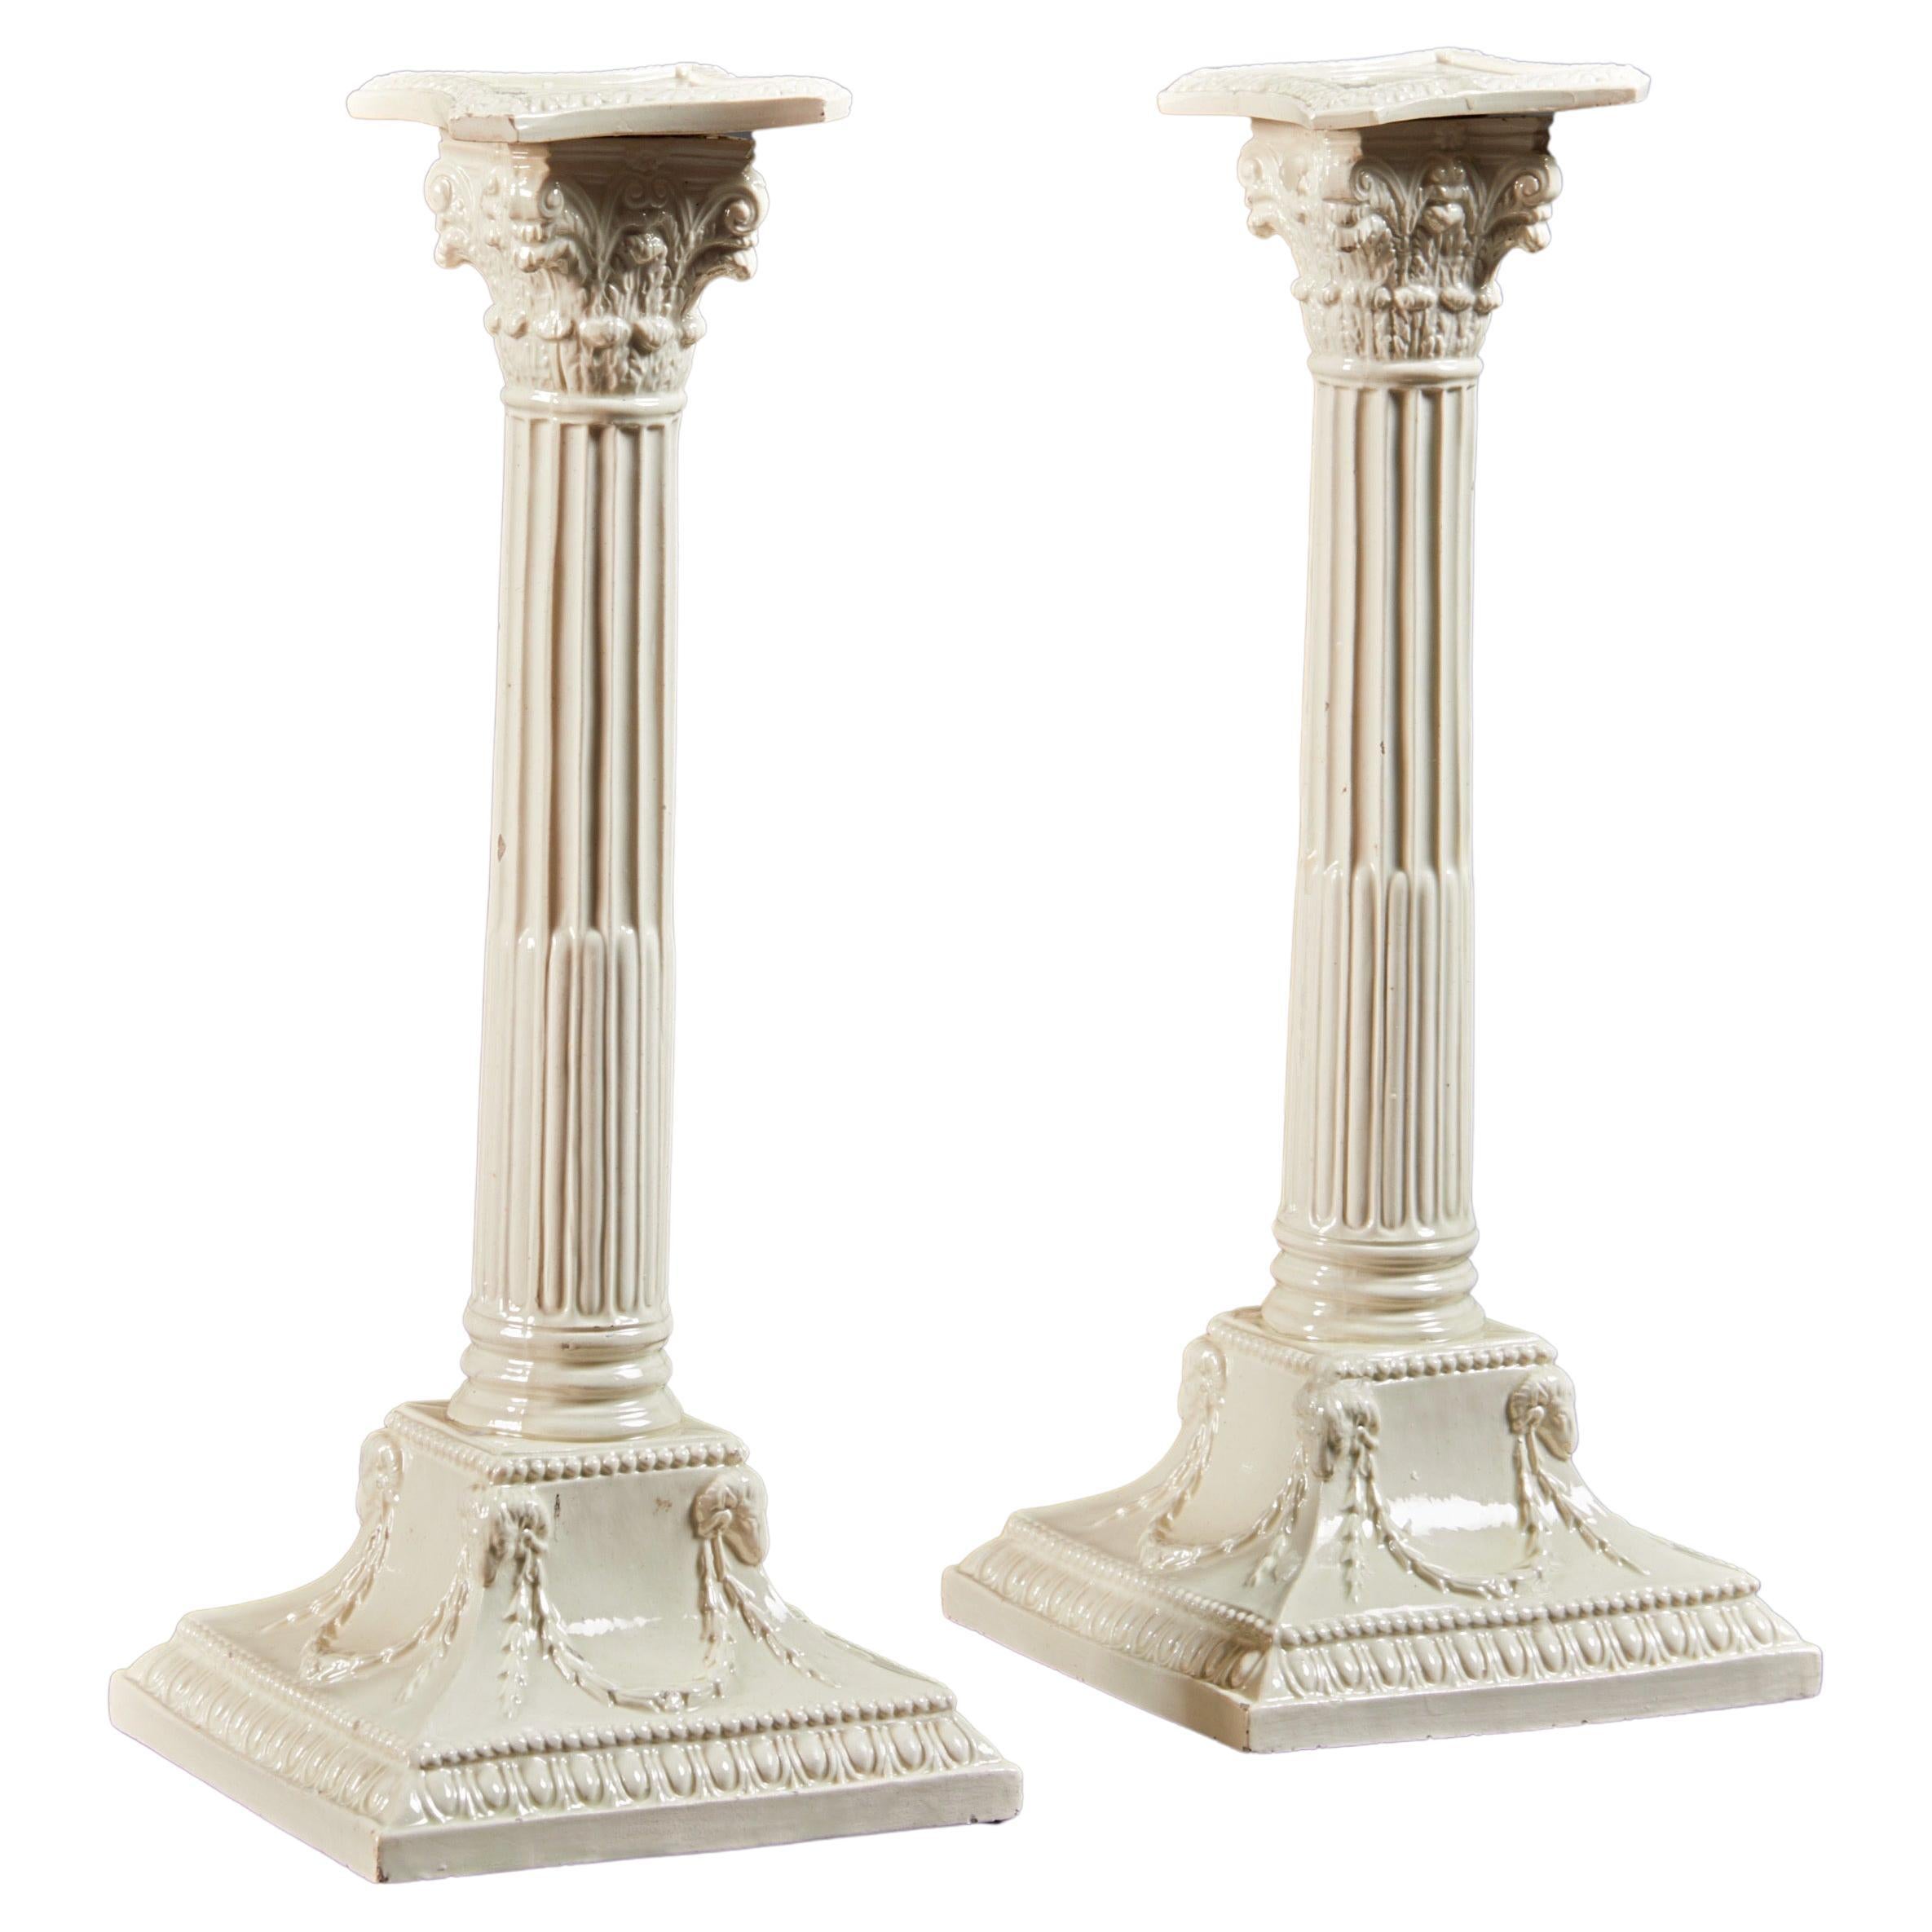 Very Fine and Beautiful Pair of English 18th Century Creamware Candlesticks For Sale